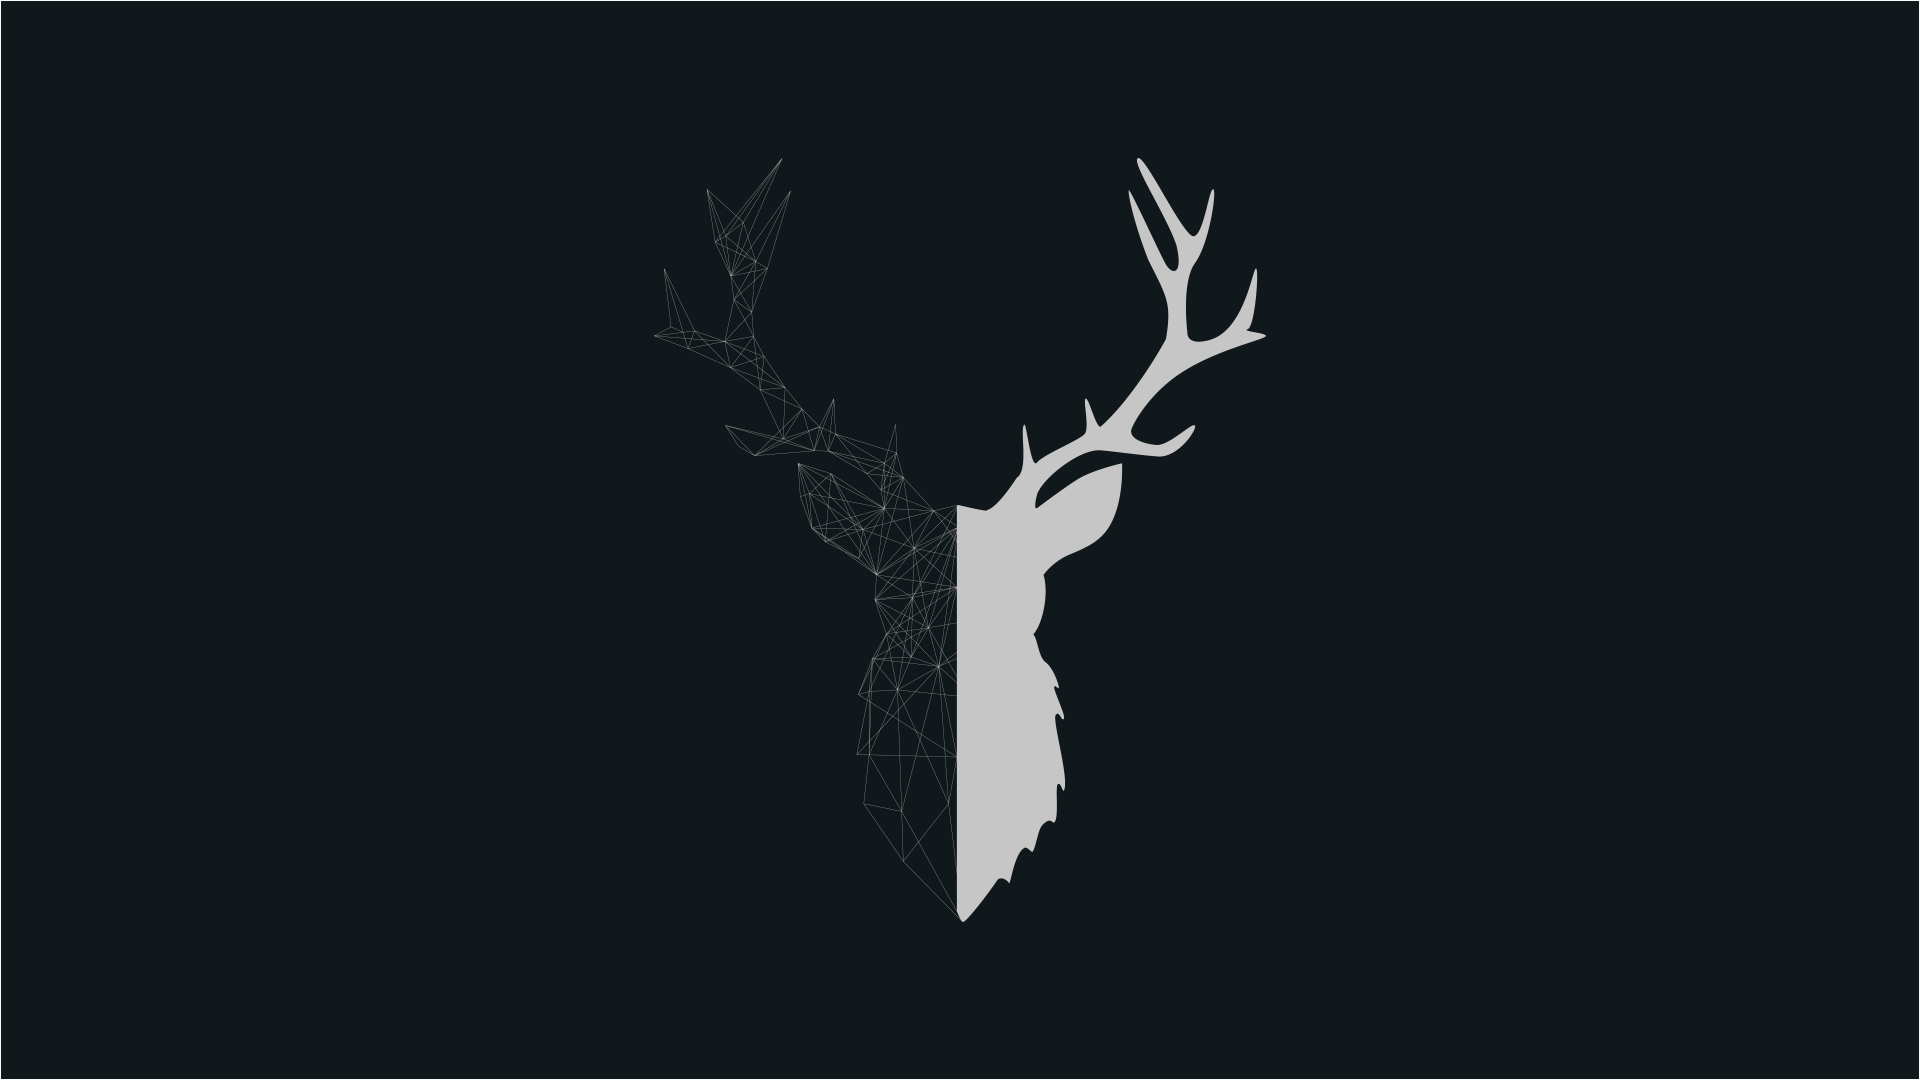 The deer head logo is a minimalist design that uses negative space to create an image of two antlers - Deer